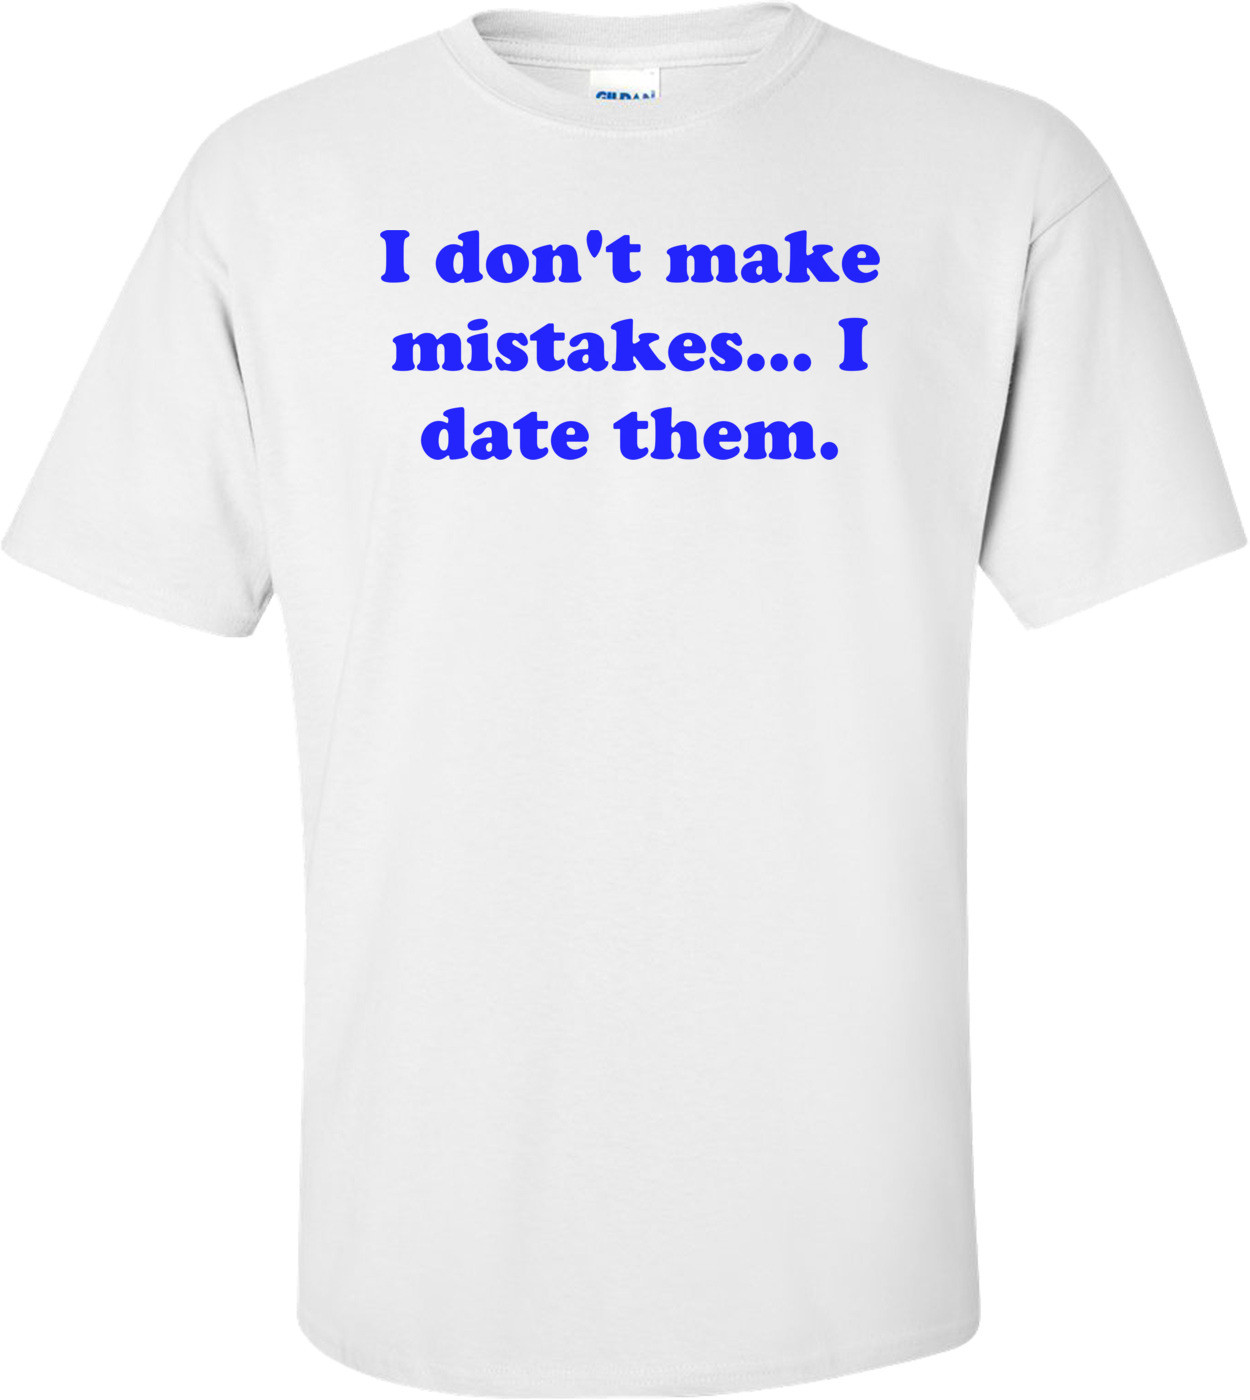 I don't make mistakes... I date them.